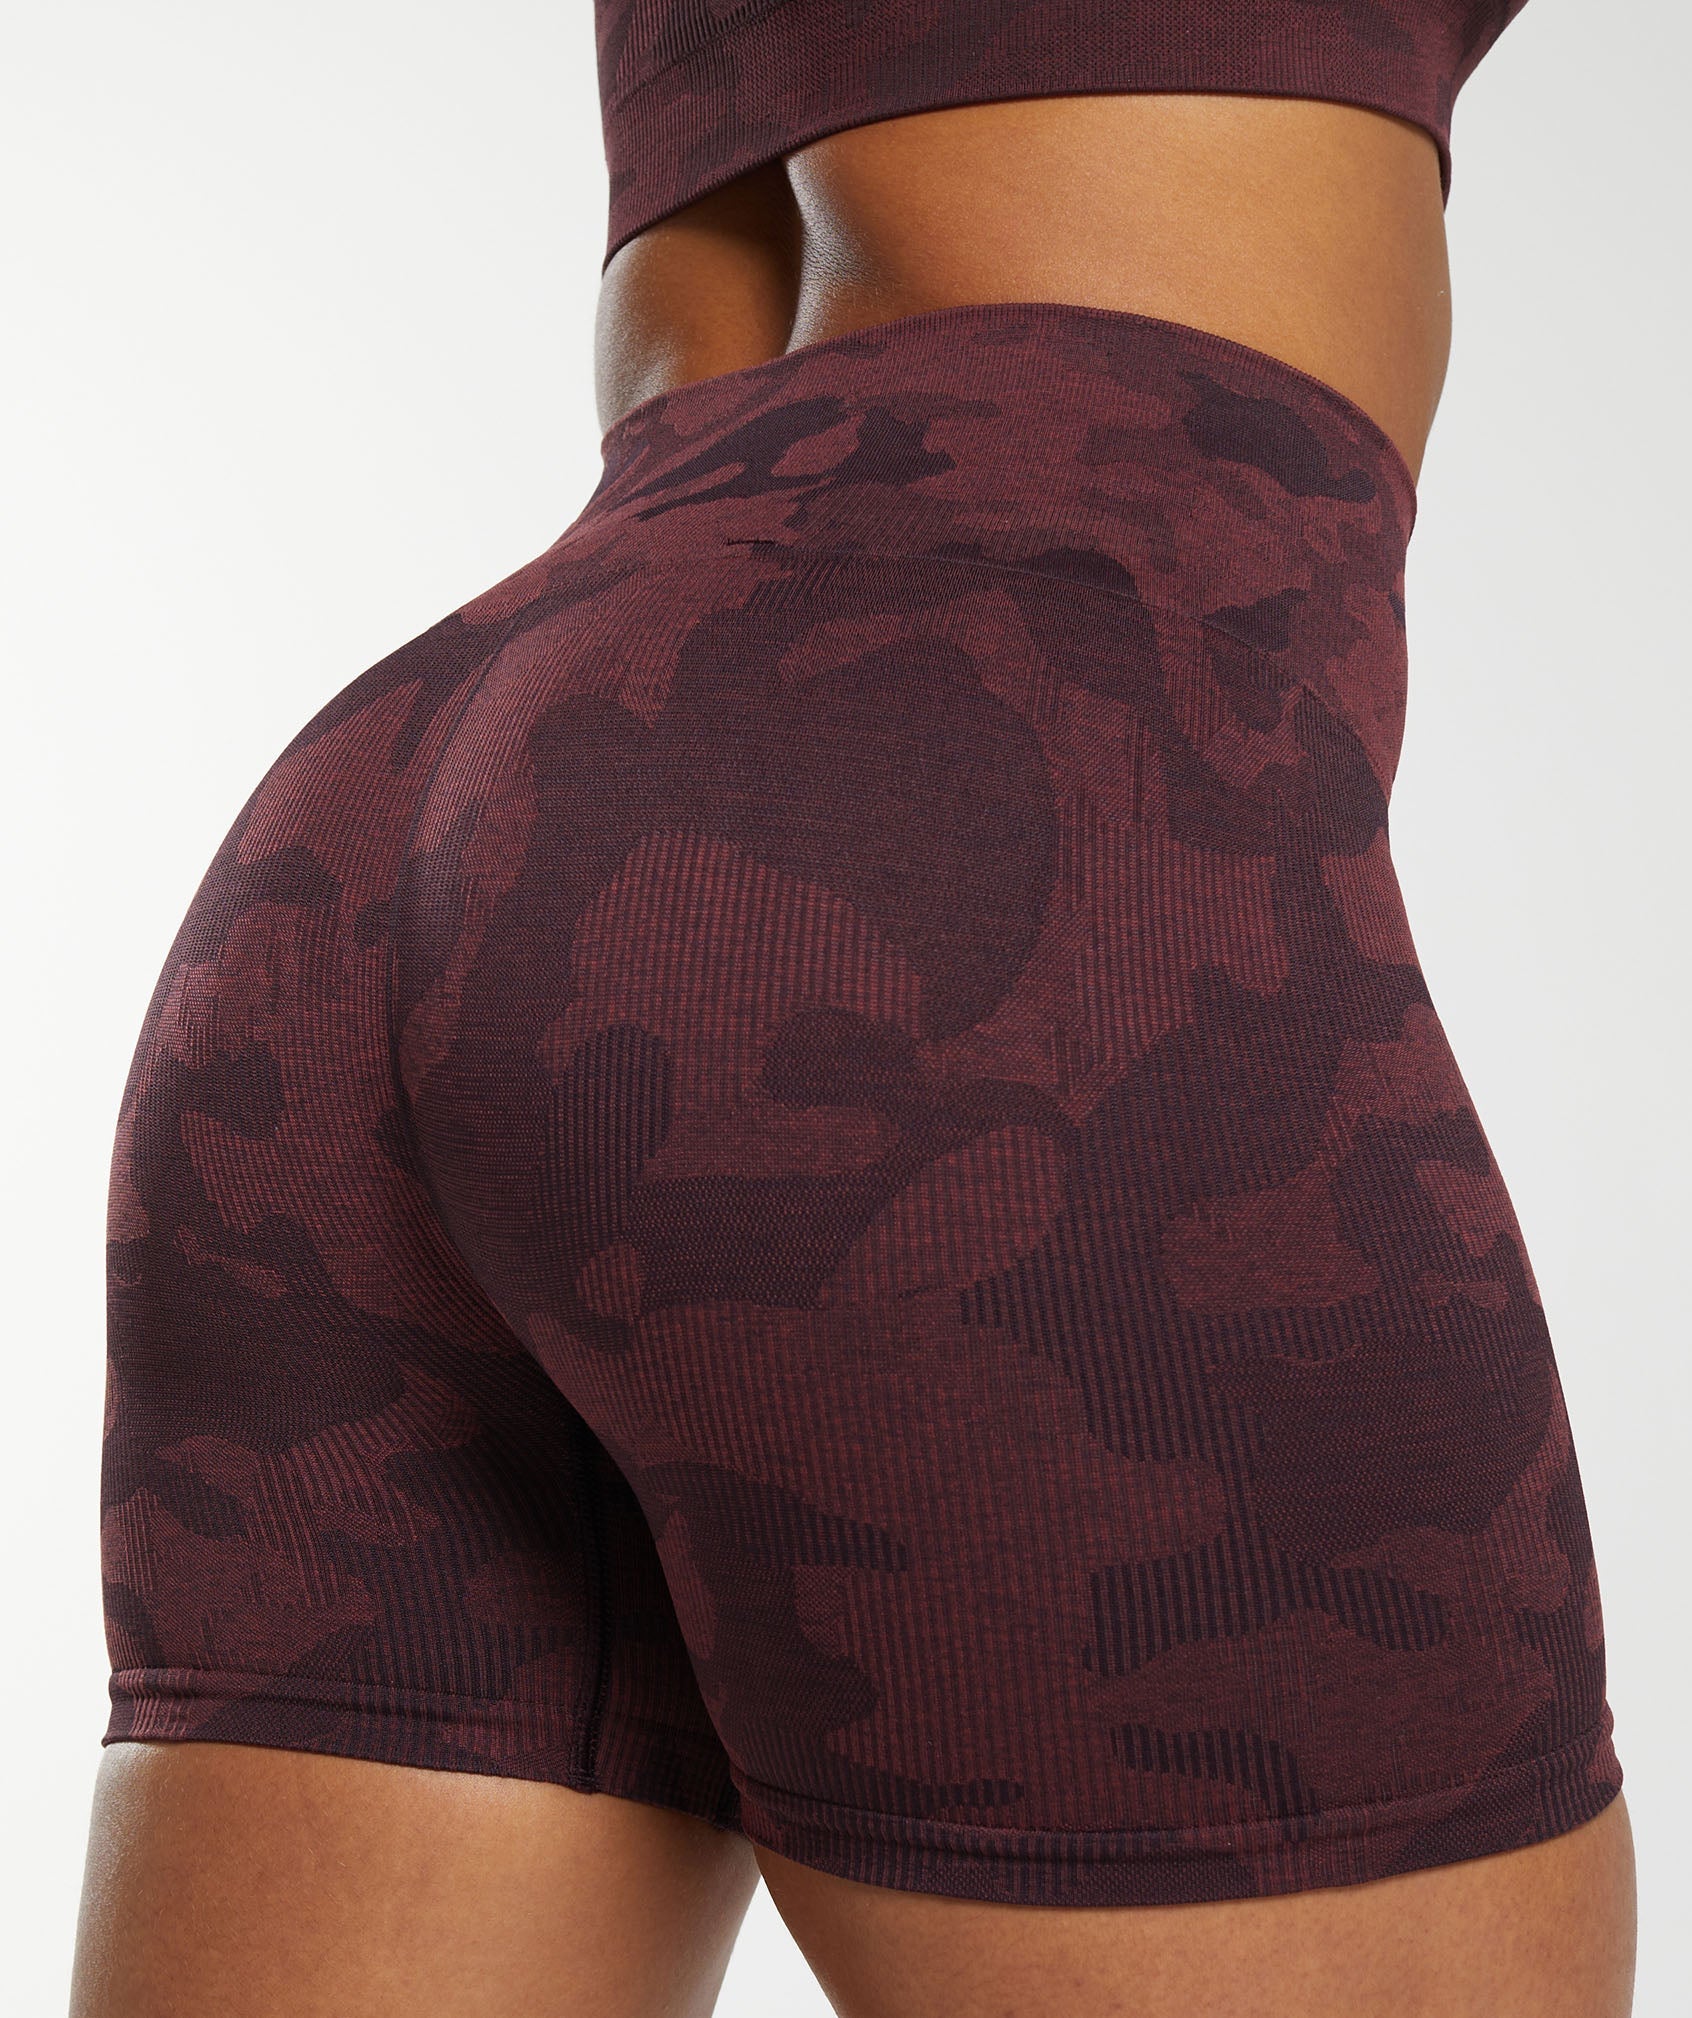 Adapt Camo Seamless Shorts in Plum Brown/Burgundy Brown - view 6